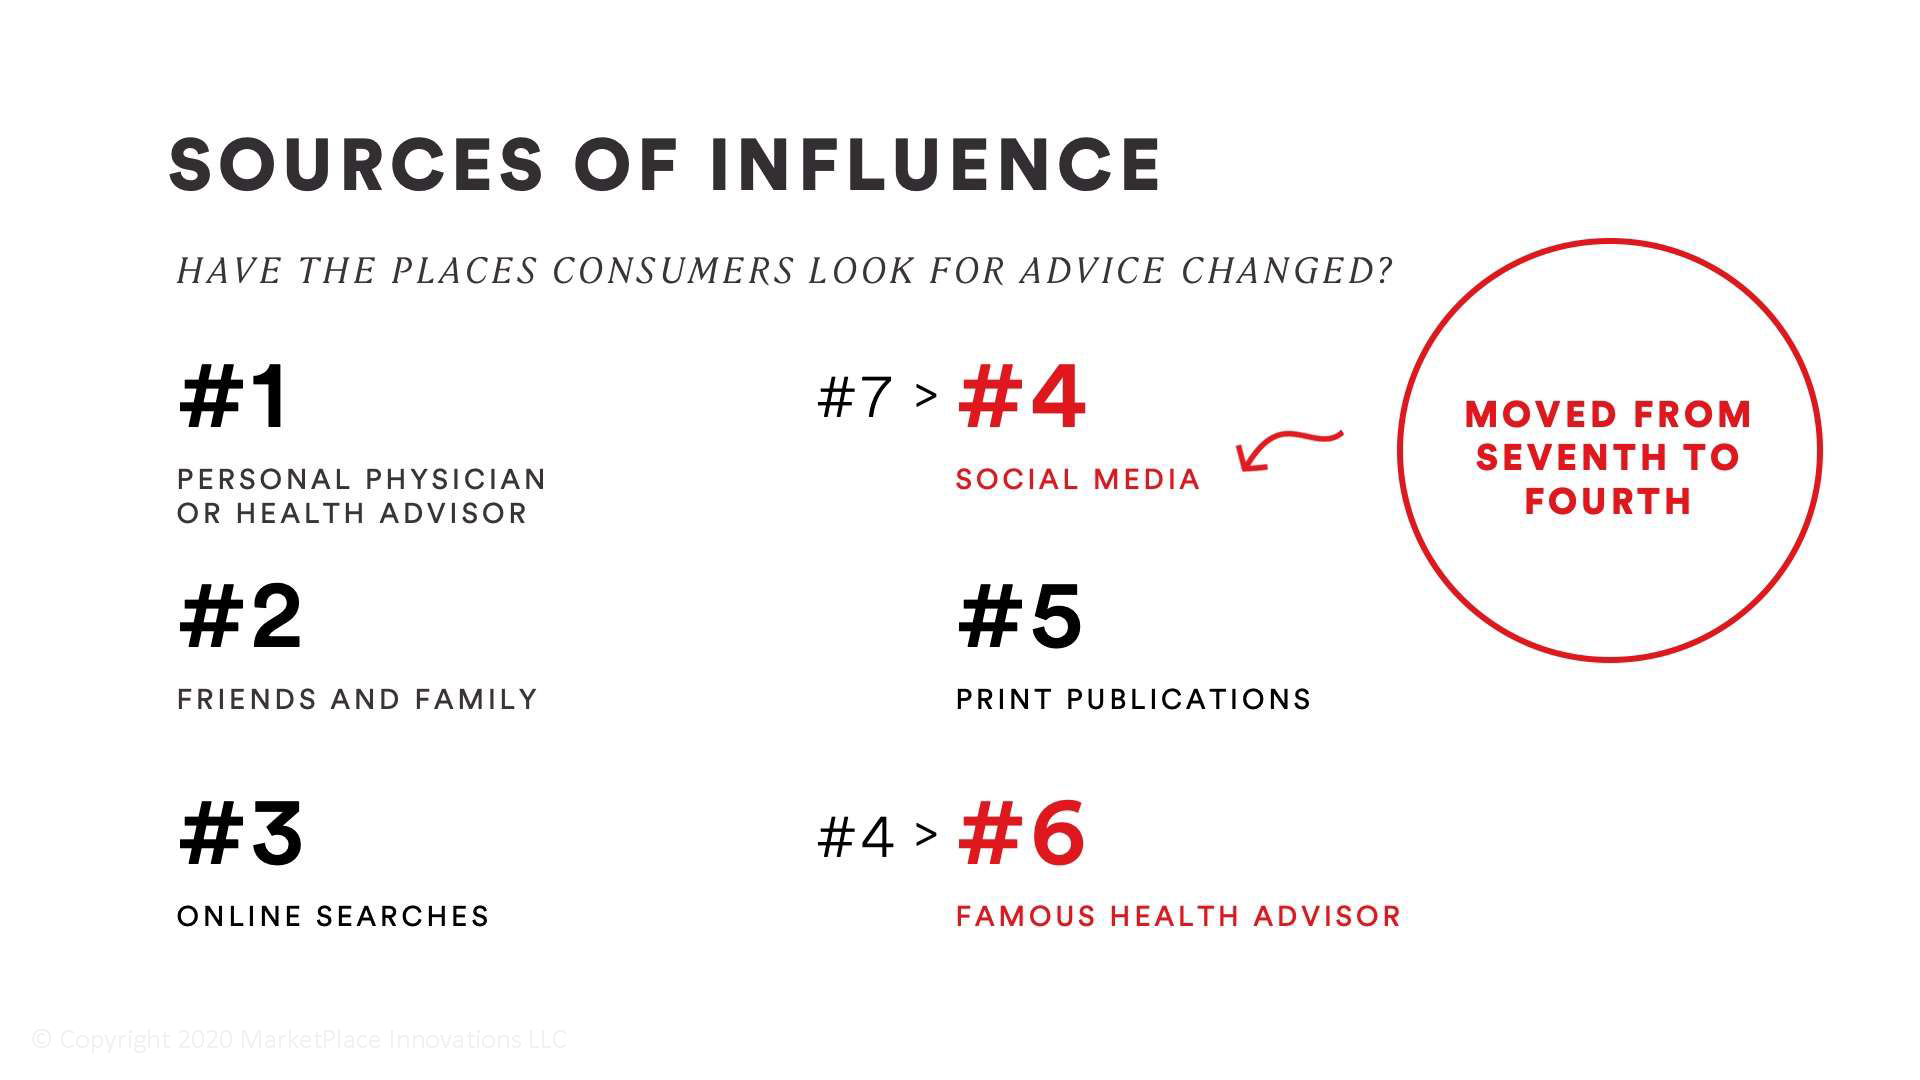 sources of influences for consumers - after covid